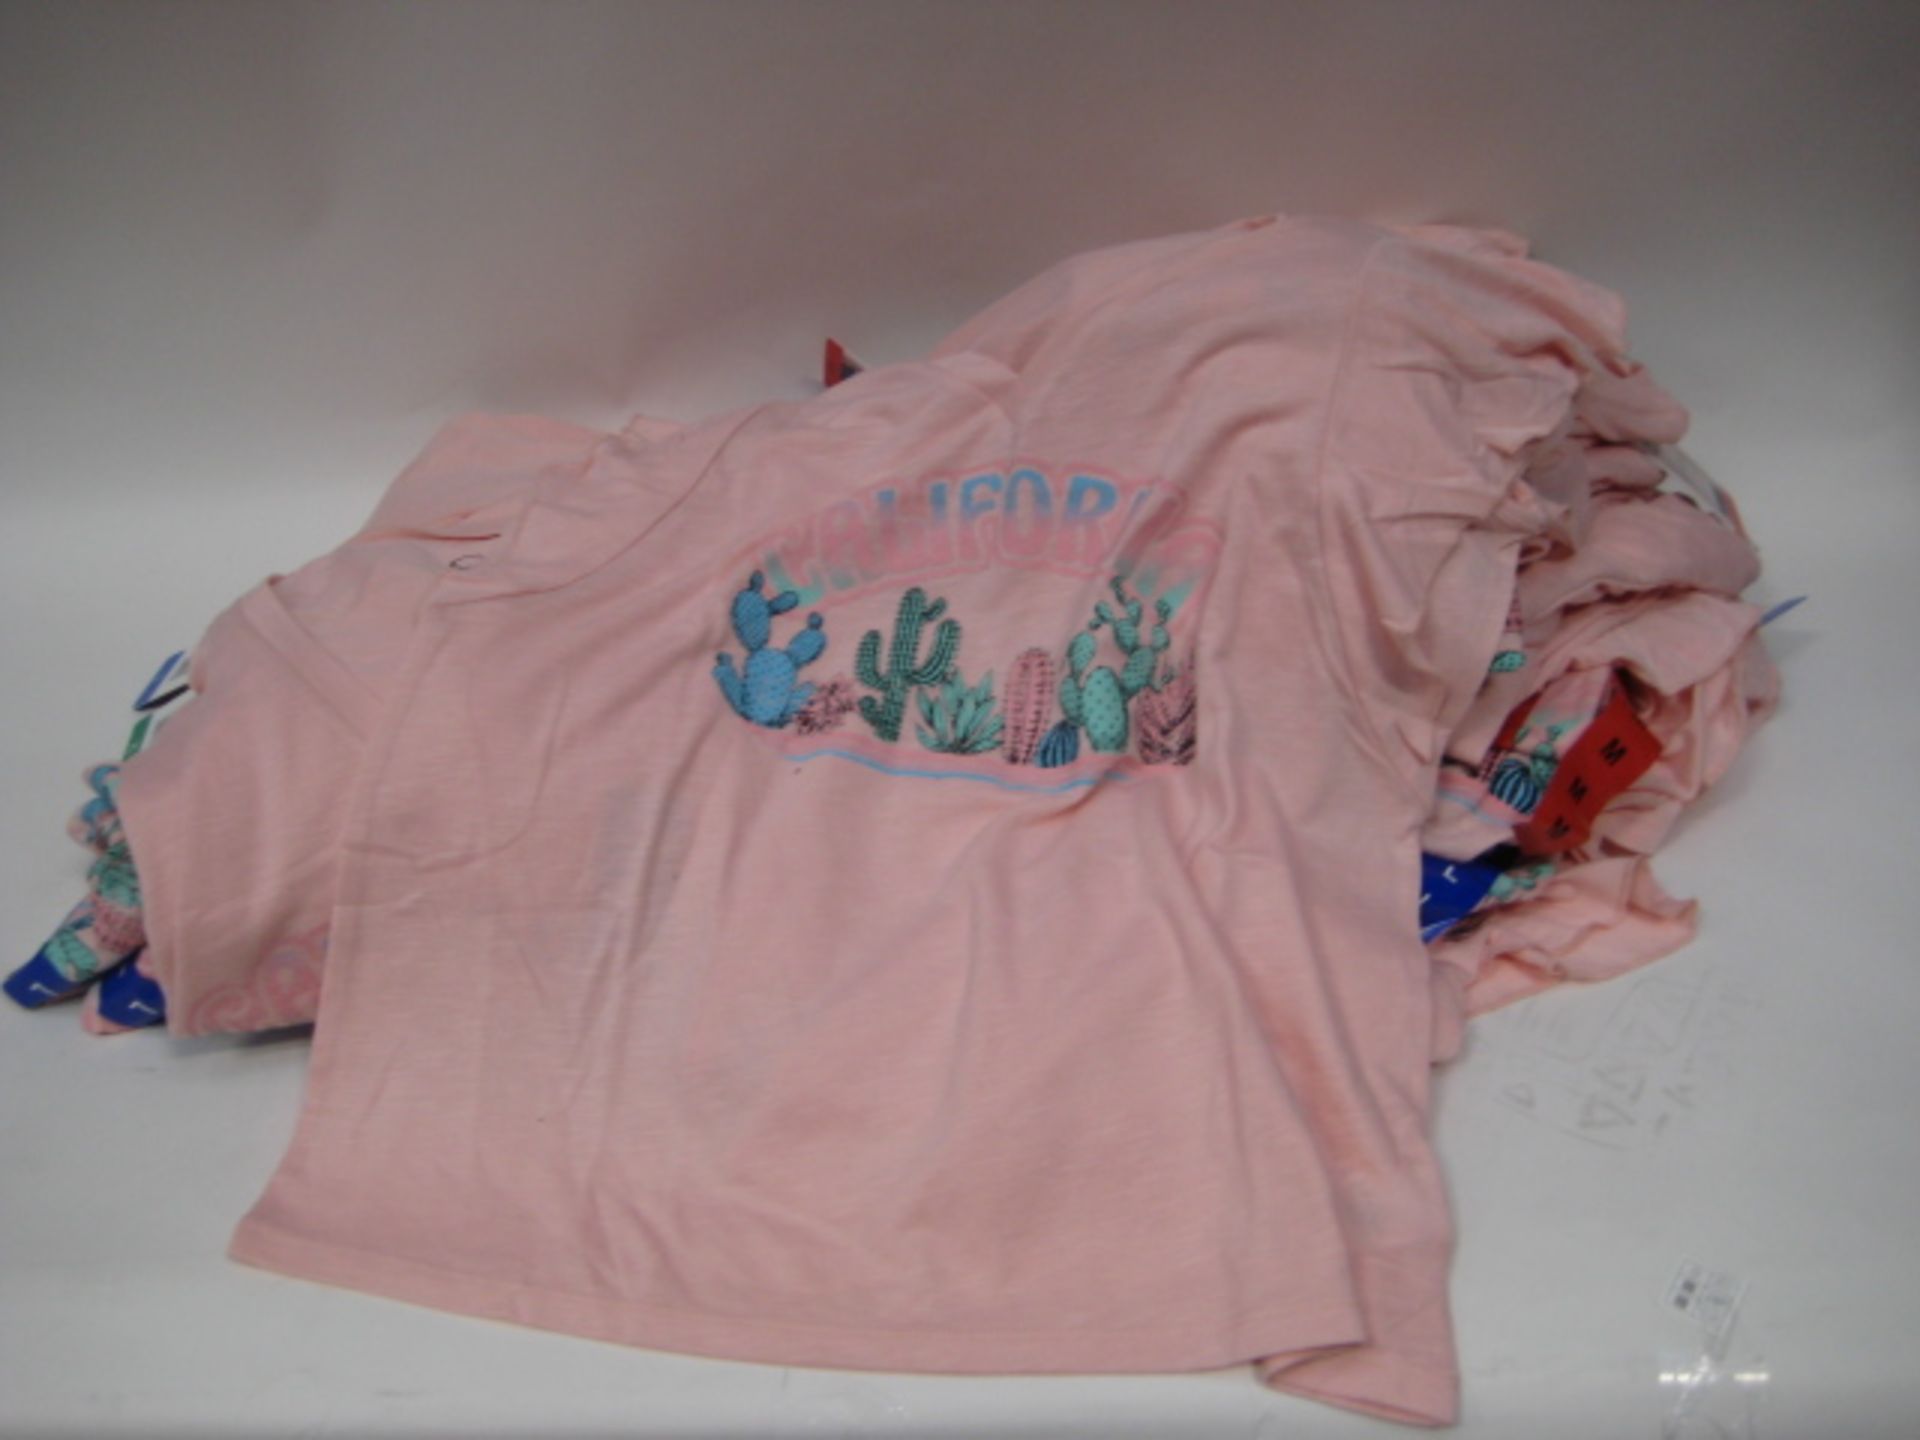 Bag of 30 Jessica Simpson pink V-neck T-shirts with a Californian motif sizes M - XL